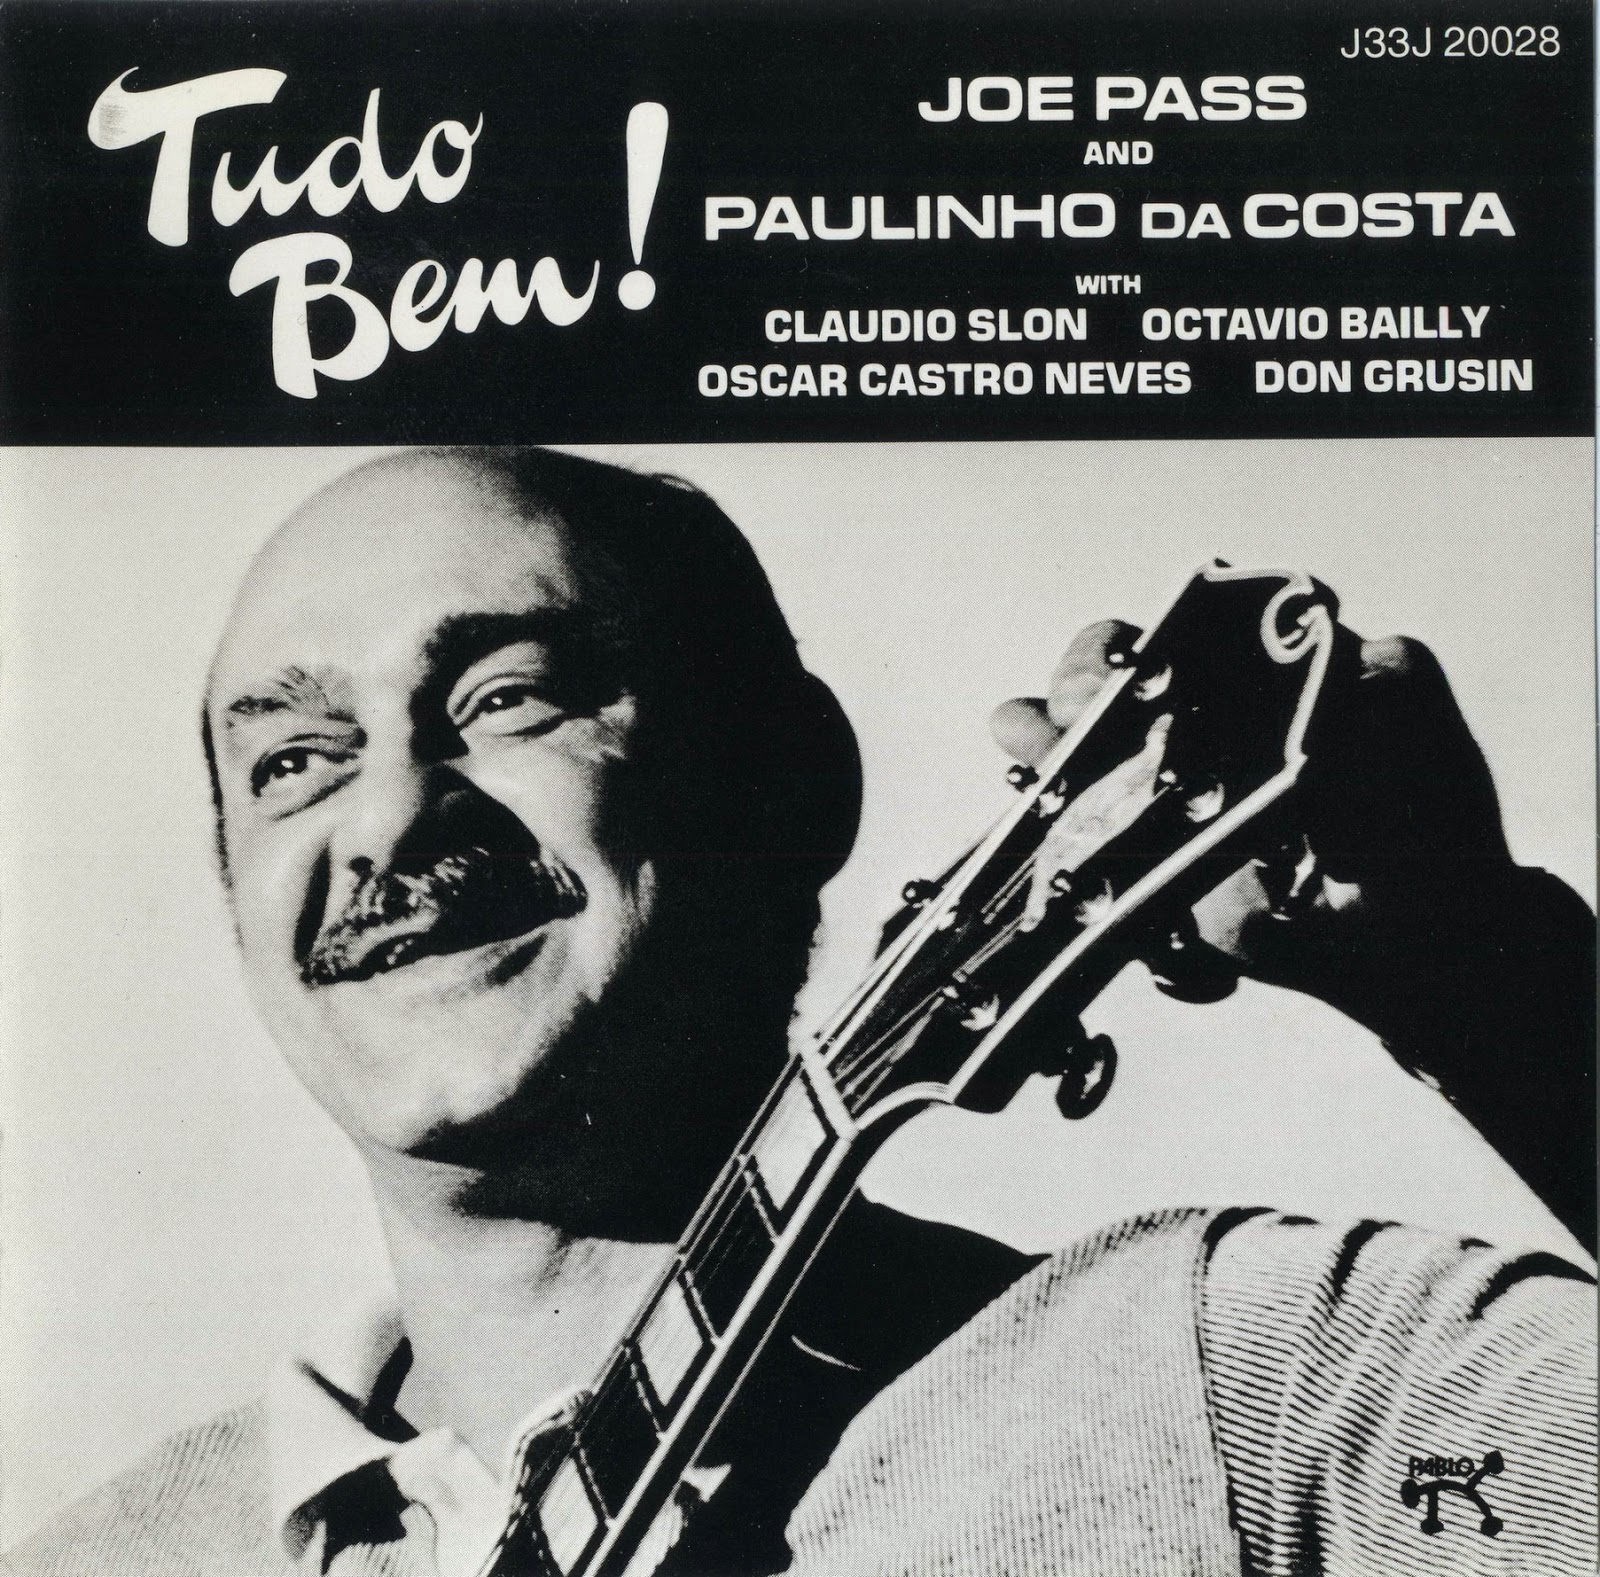 After countless solo guitar albums for Pablo, Joe Pass performed this welco...